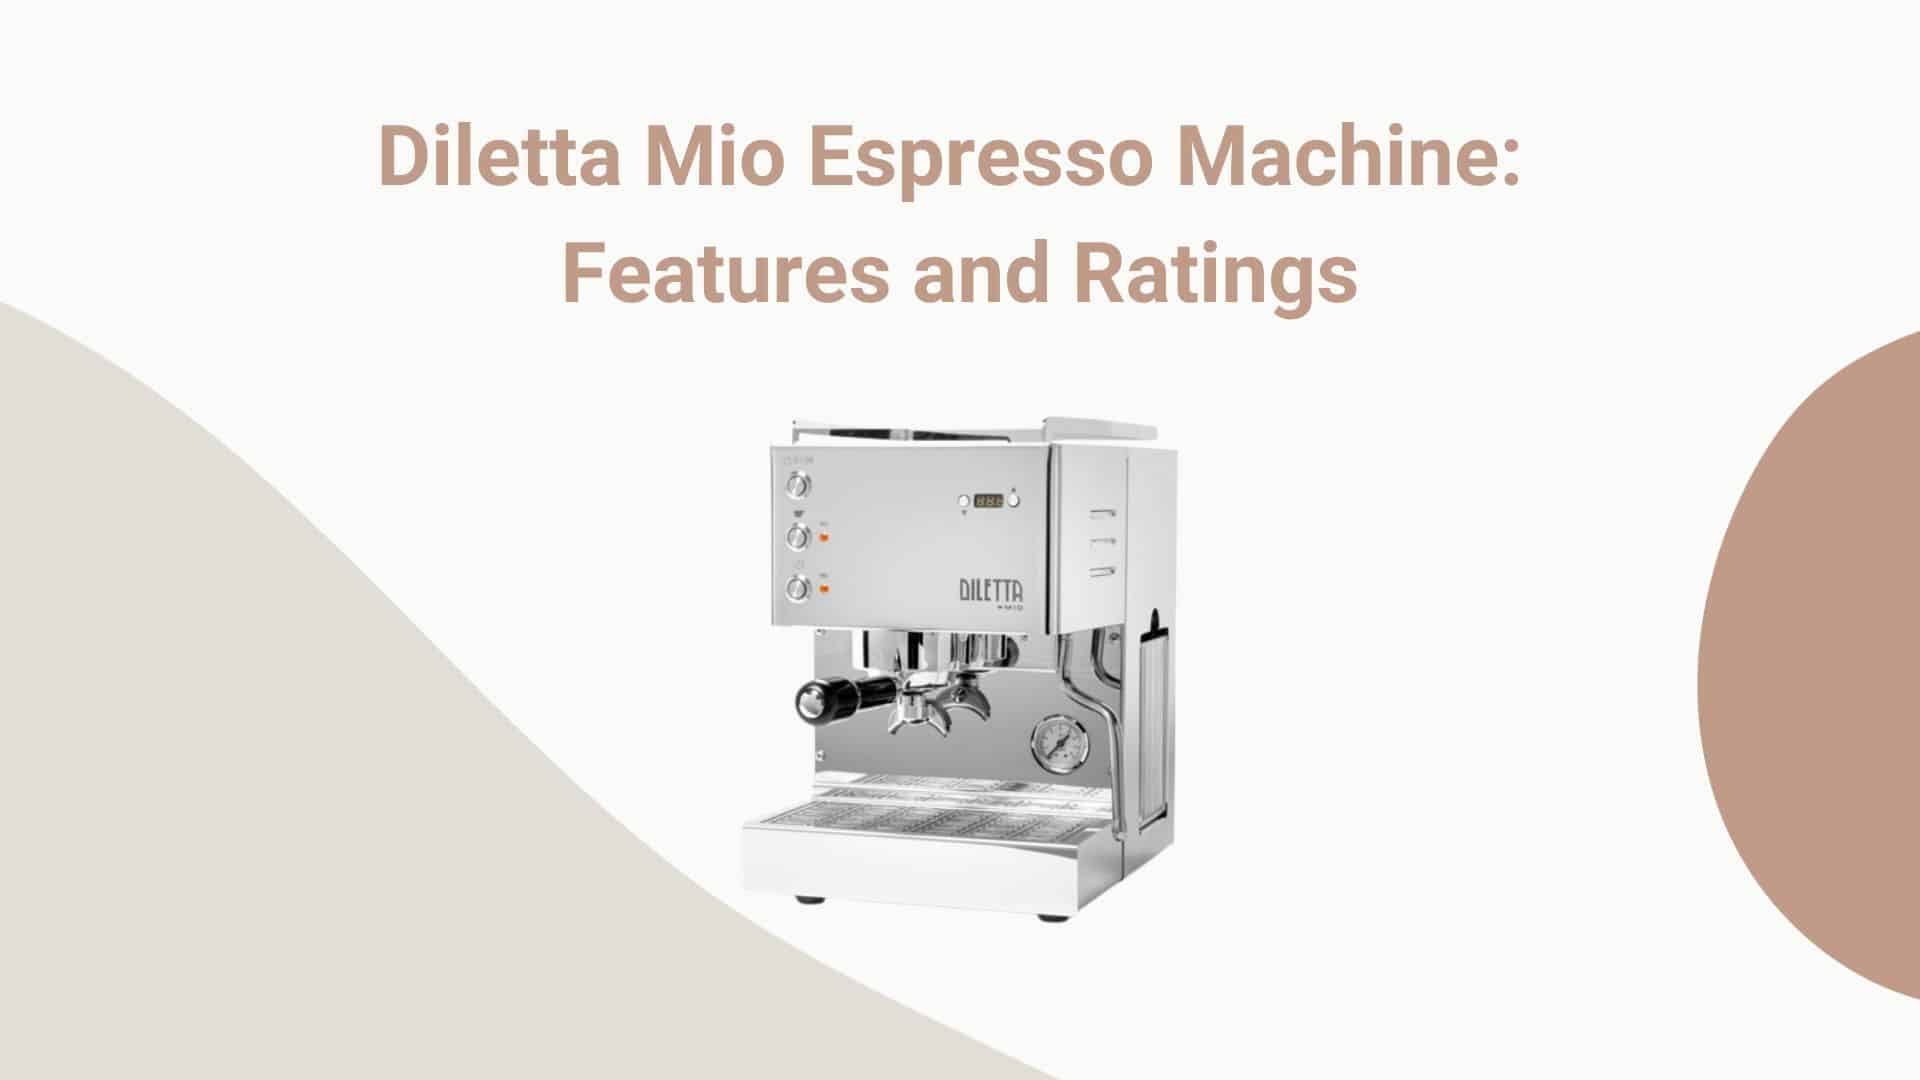 Diletta Mio Espresso Machine: Features and Ratings